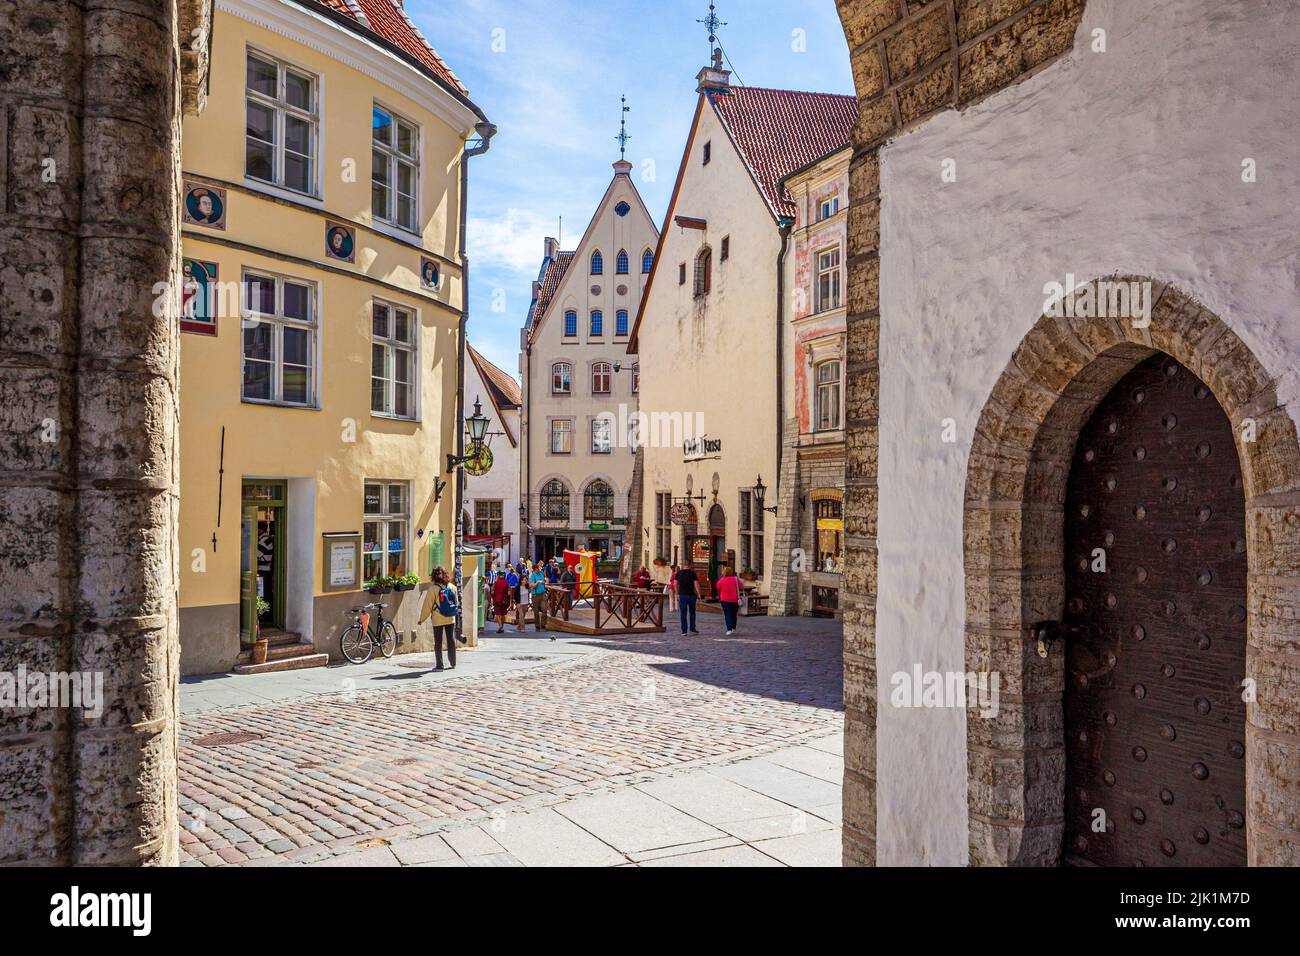 Looking out on the Old Town from the arches of the 14th century Town Hall (Tallinna raekoda) in the square of Tallinn the capital city of Estonia Stock Photo